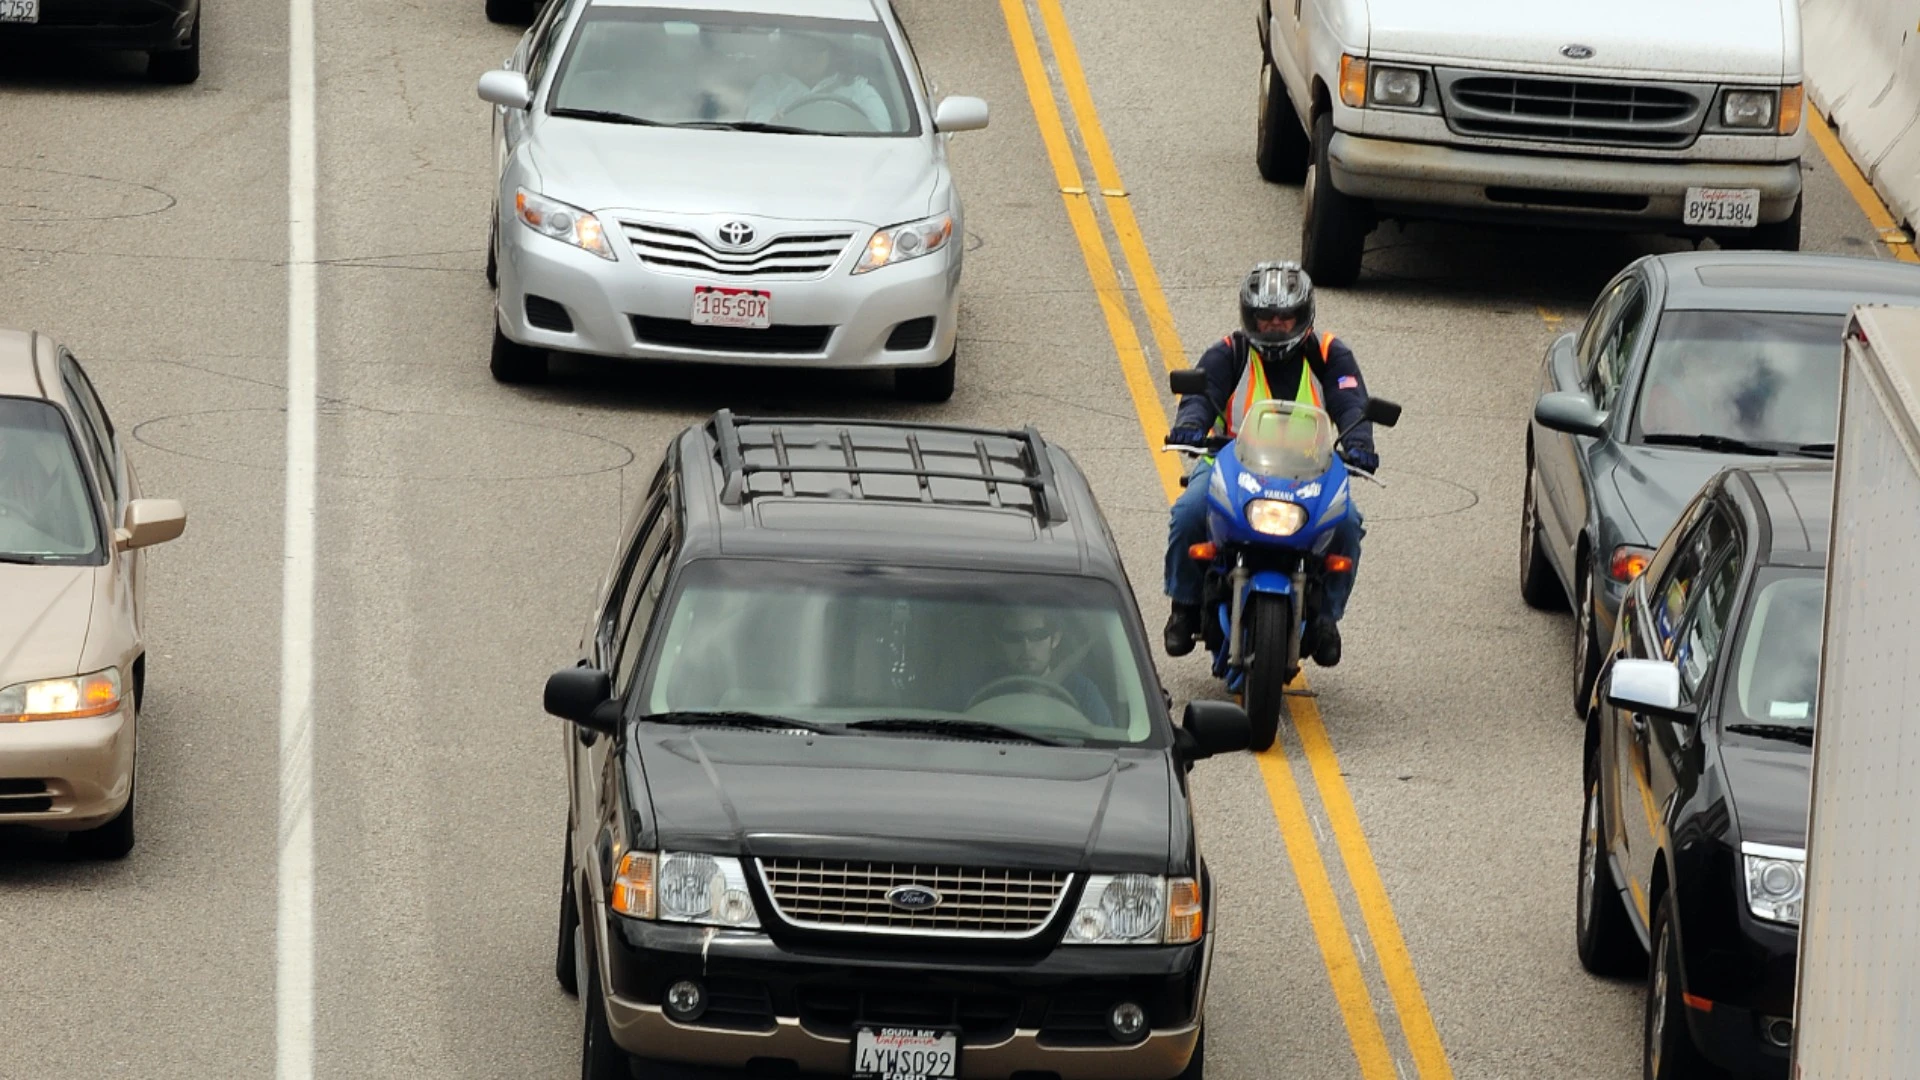 Motorcyclist lane splitting - efficient and legal way to beat traffic